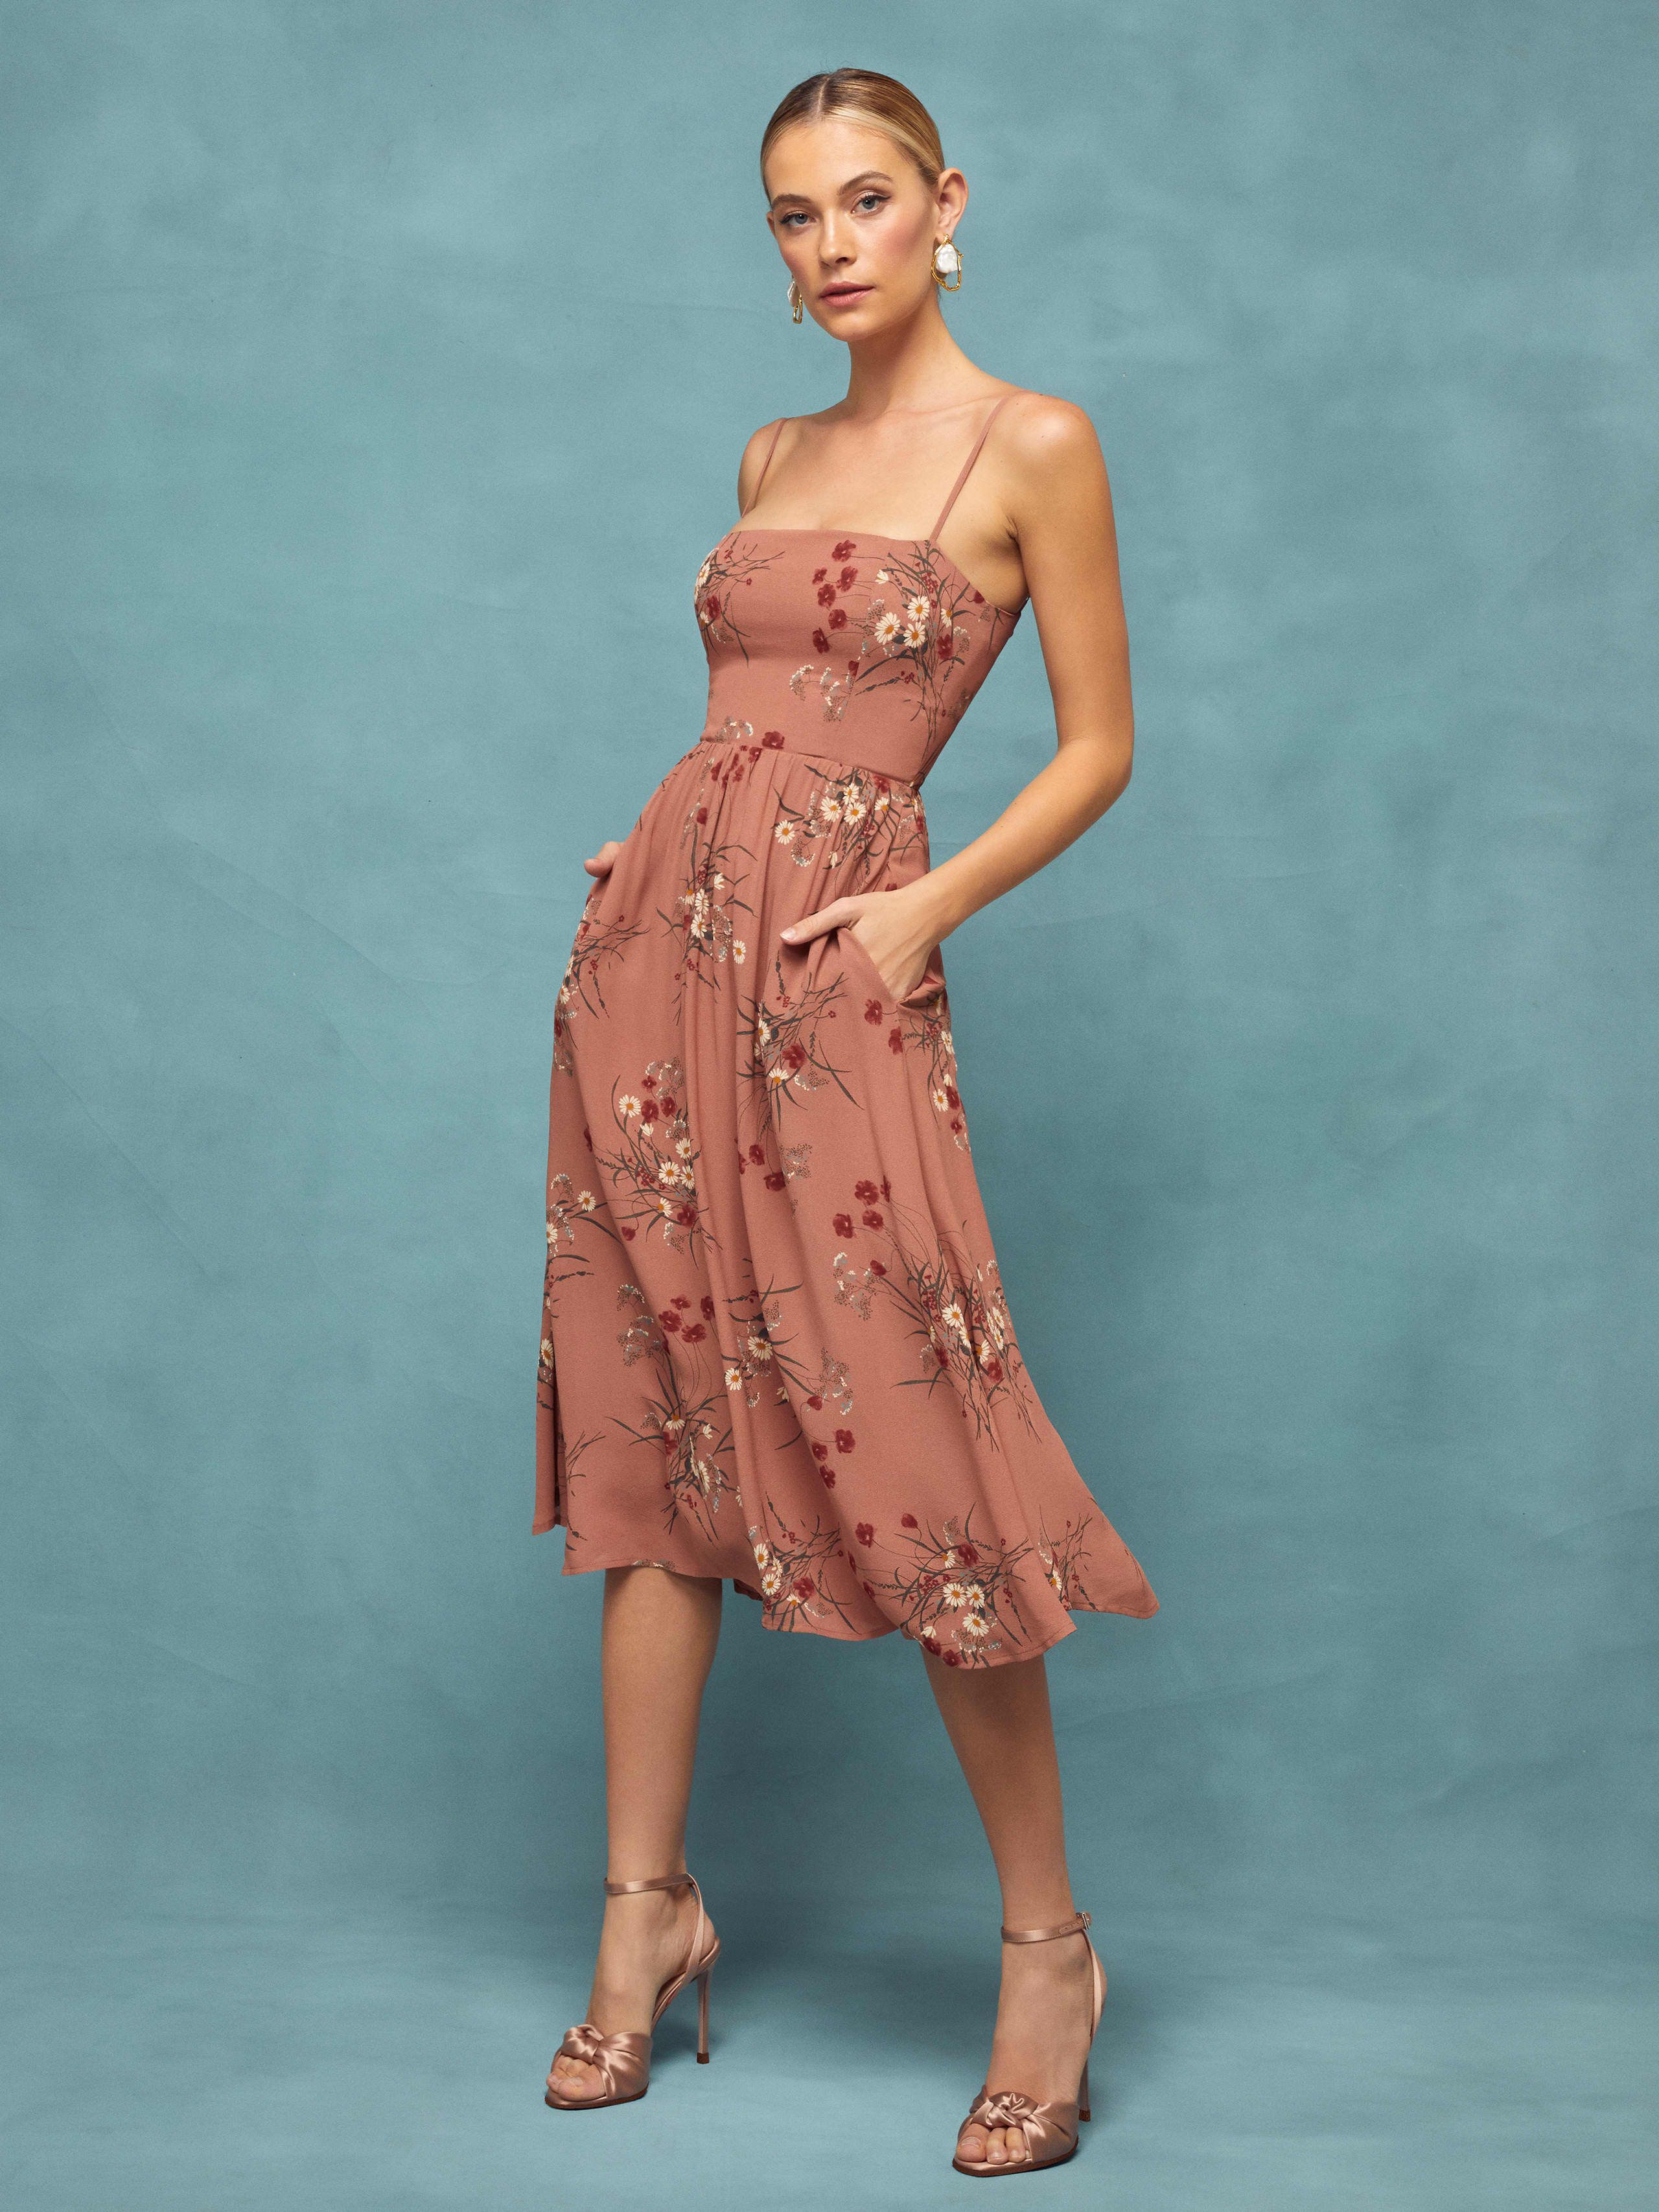 25 Fall Wedding Guest Dresses What To Wear To A Fall Wedding